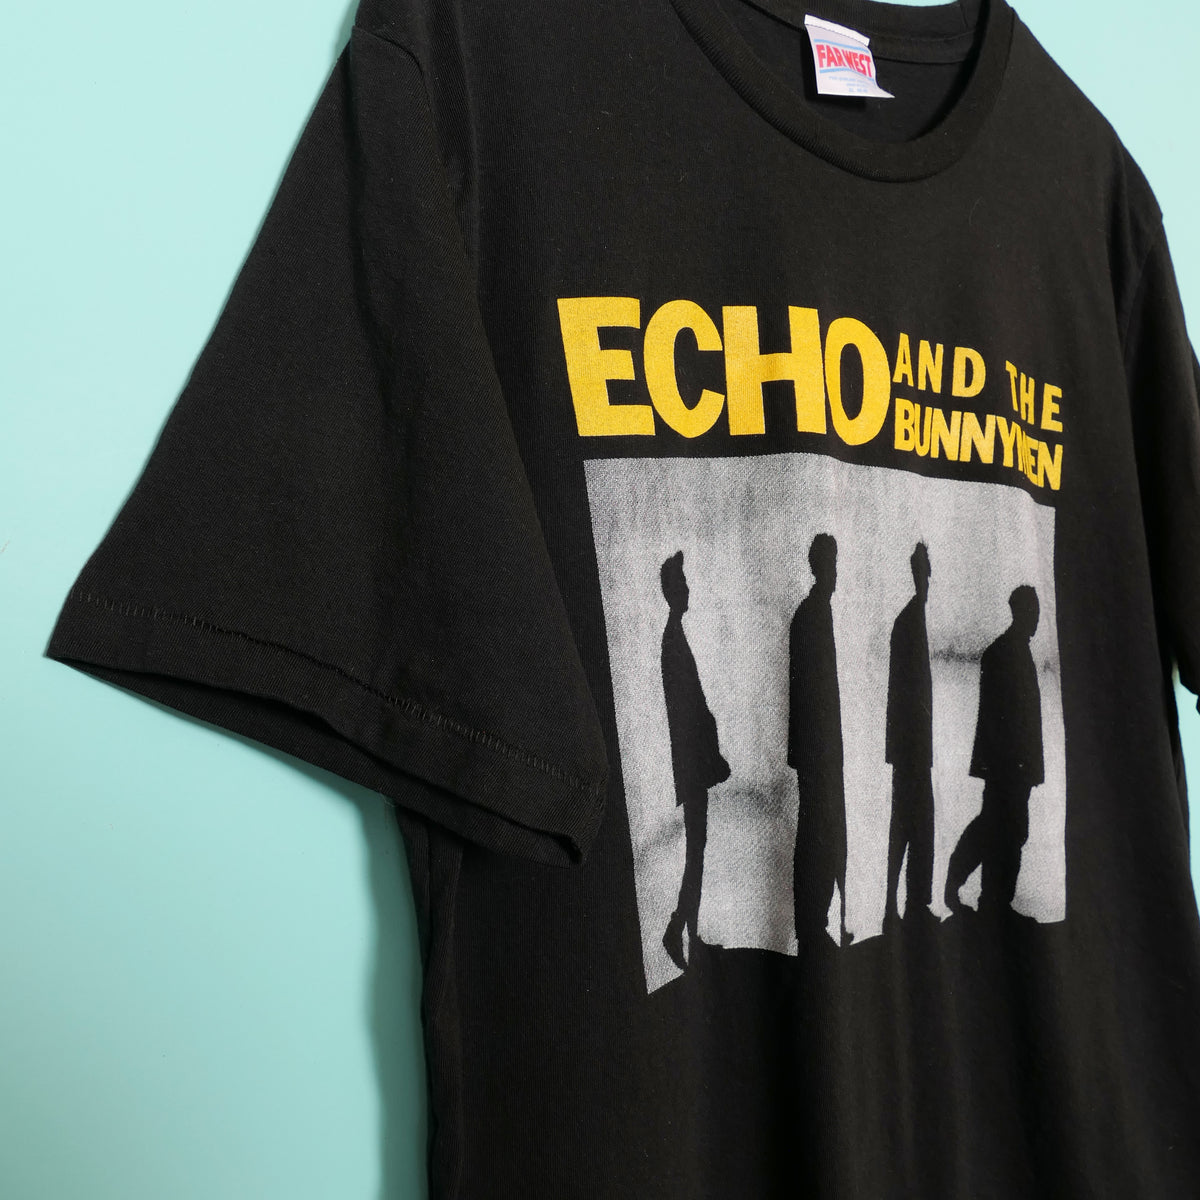 Echo and the Bunnymen Tee